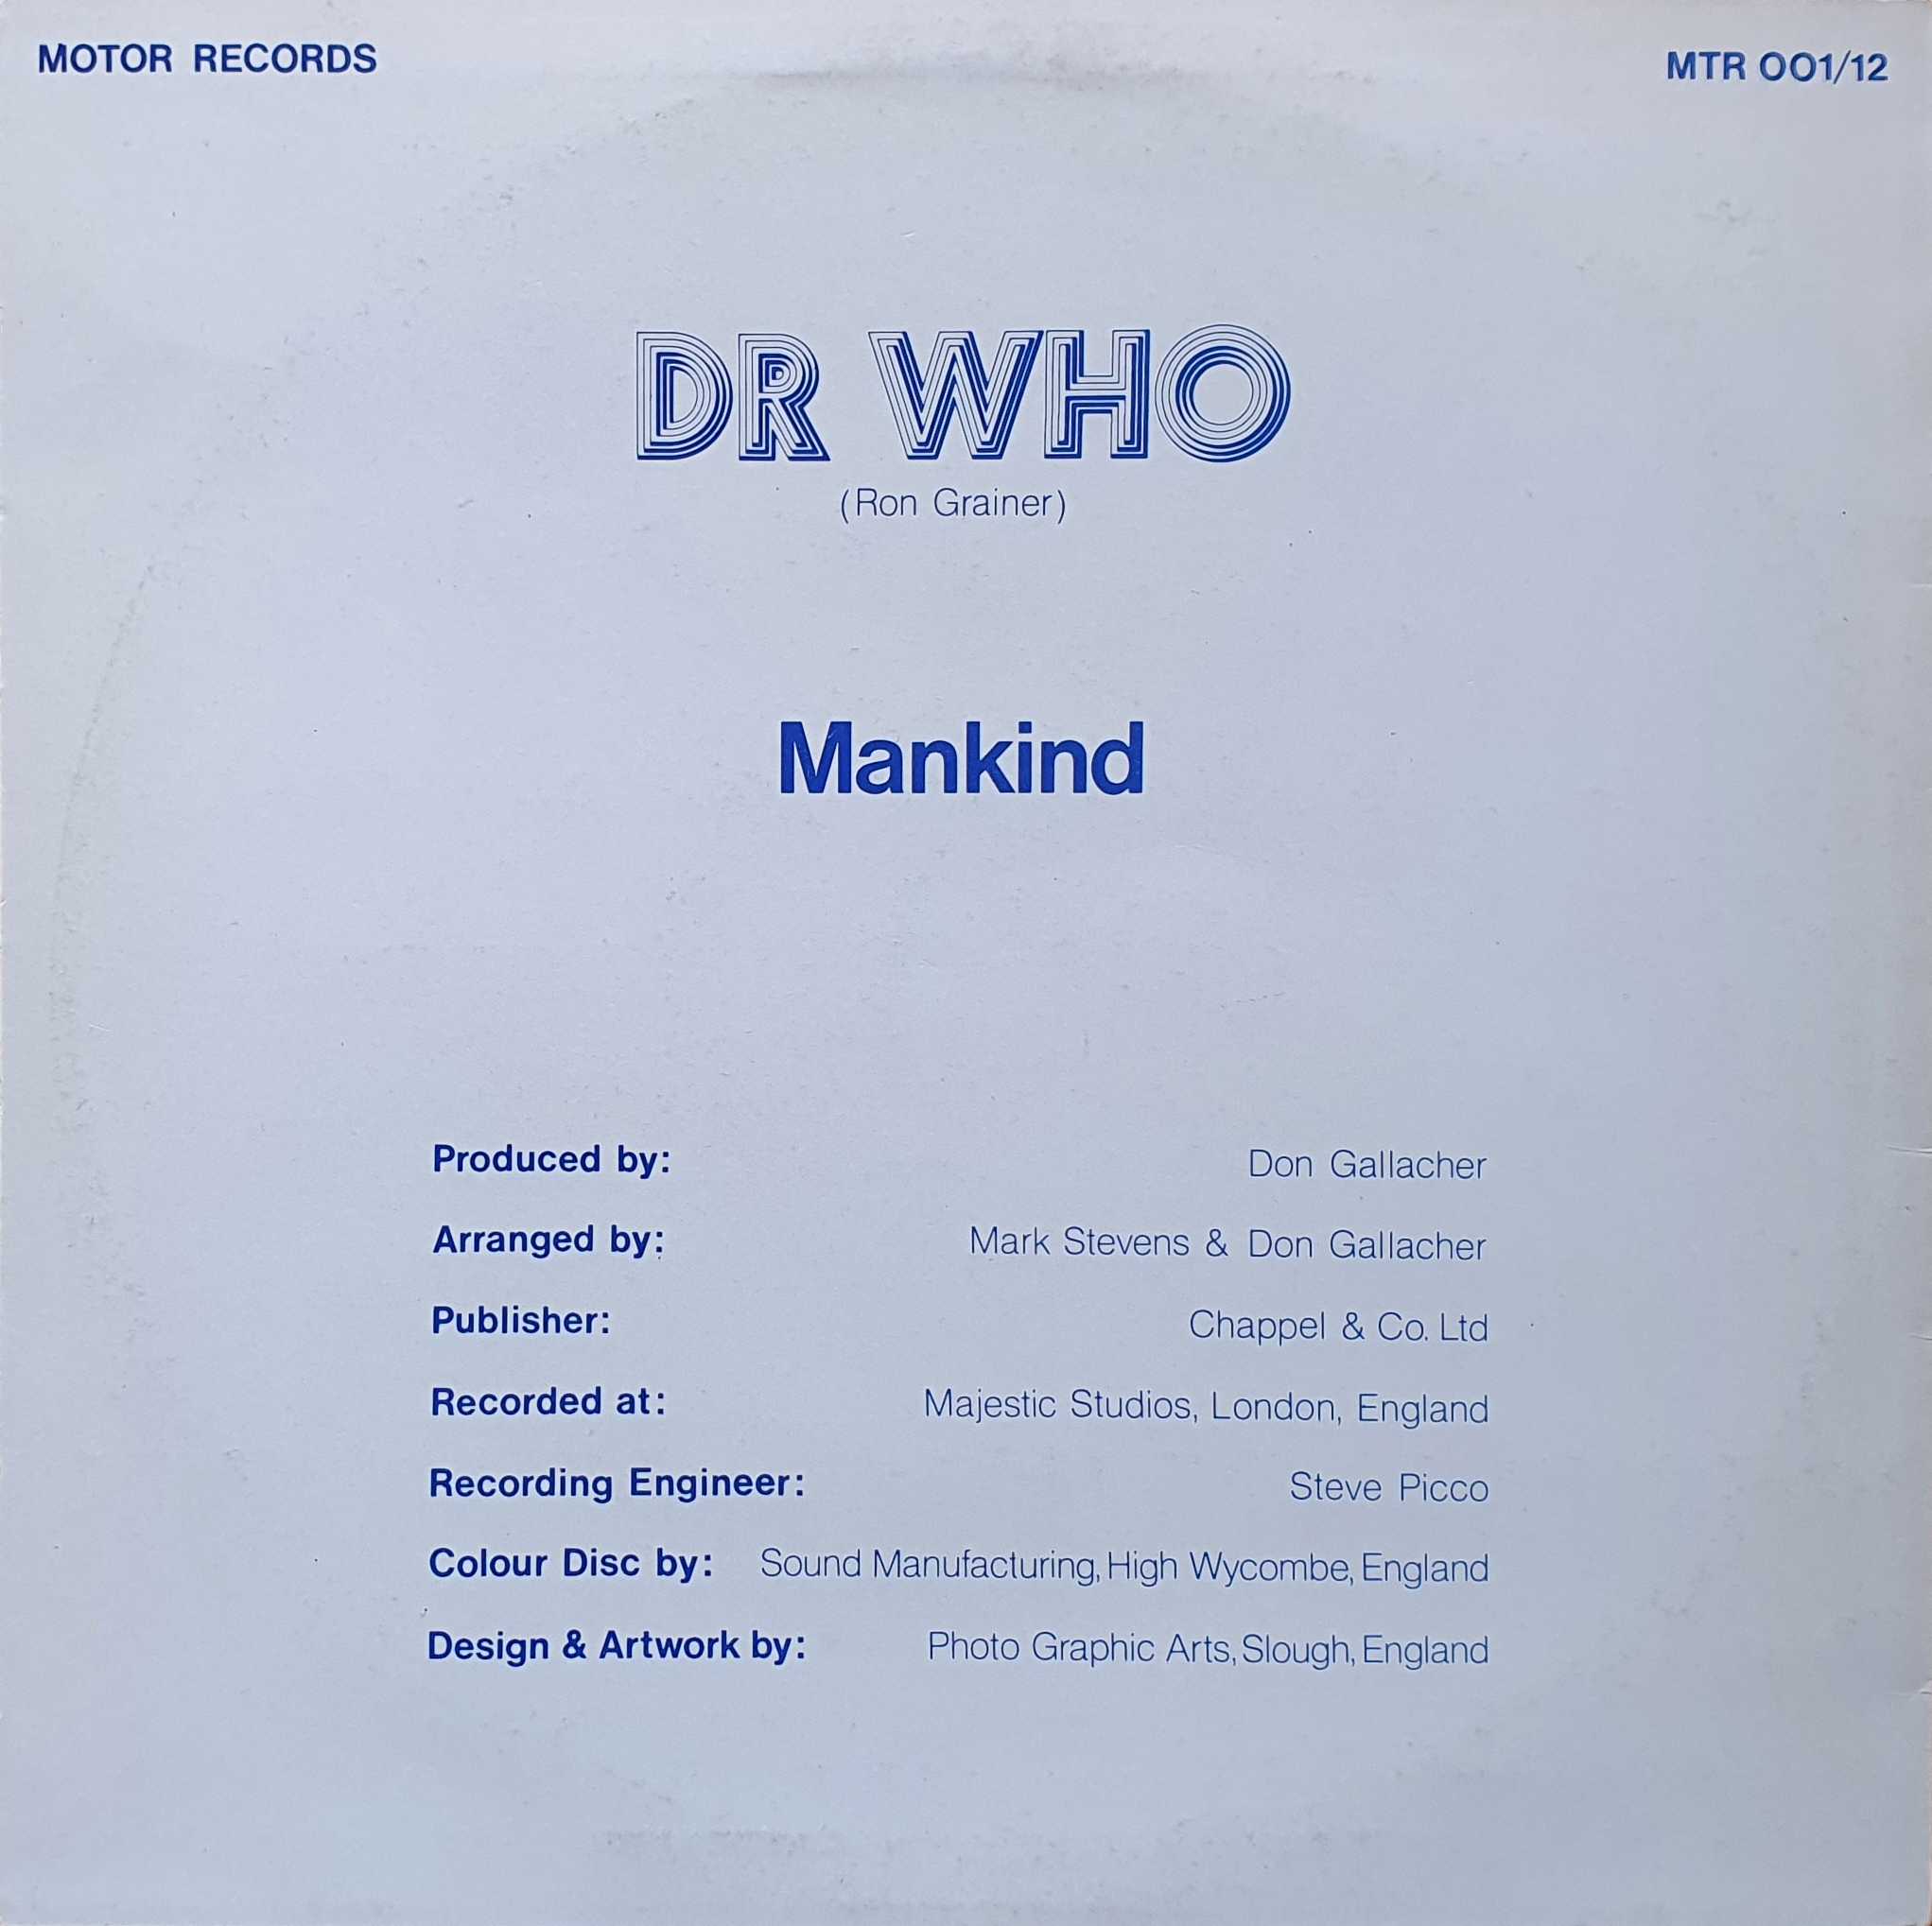 Picture of MTR 001 12 Doctor Who (Cosmic remix) by artist Ron Grainer / Mark Stevens / Mankind from the BBC records and Tapes library